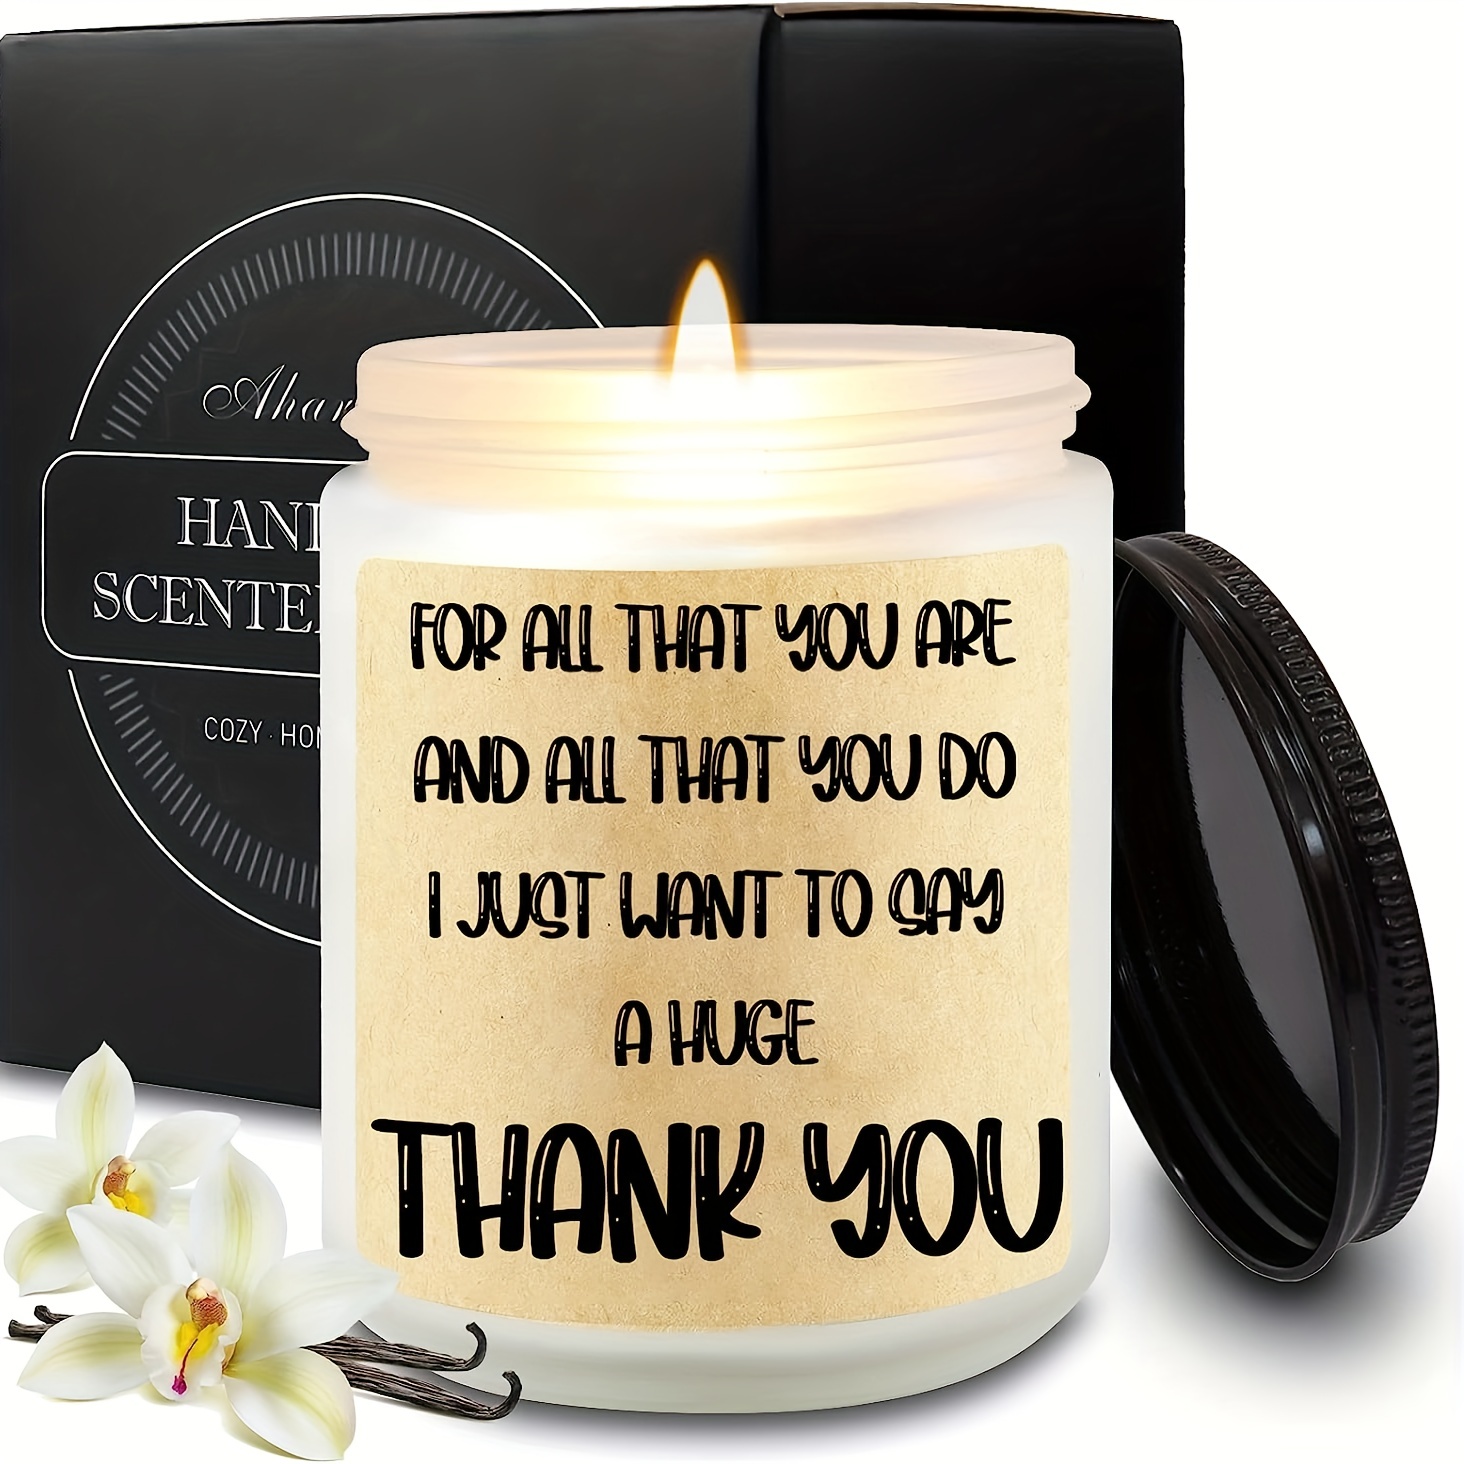  Mtlee 24 Pcs Thank You Gift for Women Scented Candles 3.2 oz  Scented Candle Natural Soy Wax Aromatherapy Candle Inspirational Employee  Appreciation Gift Thank You Candle for Coworker Friend Teacher 